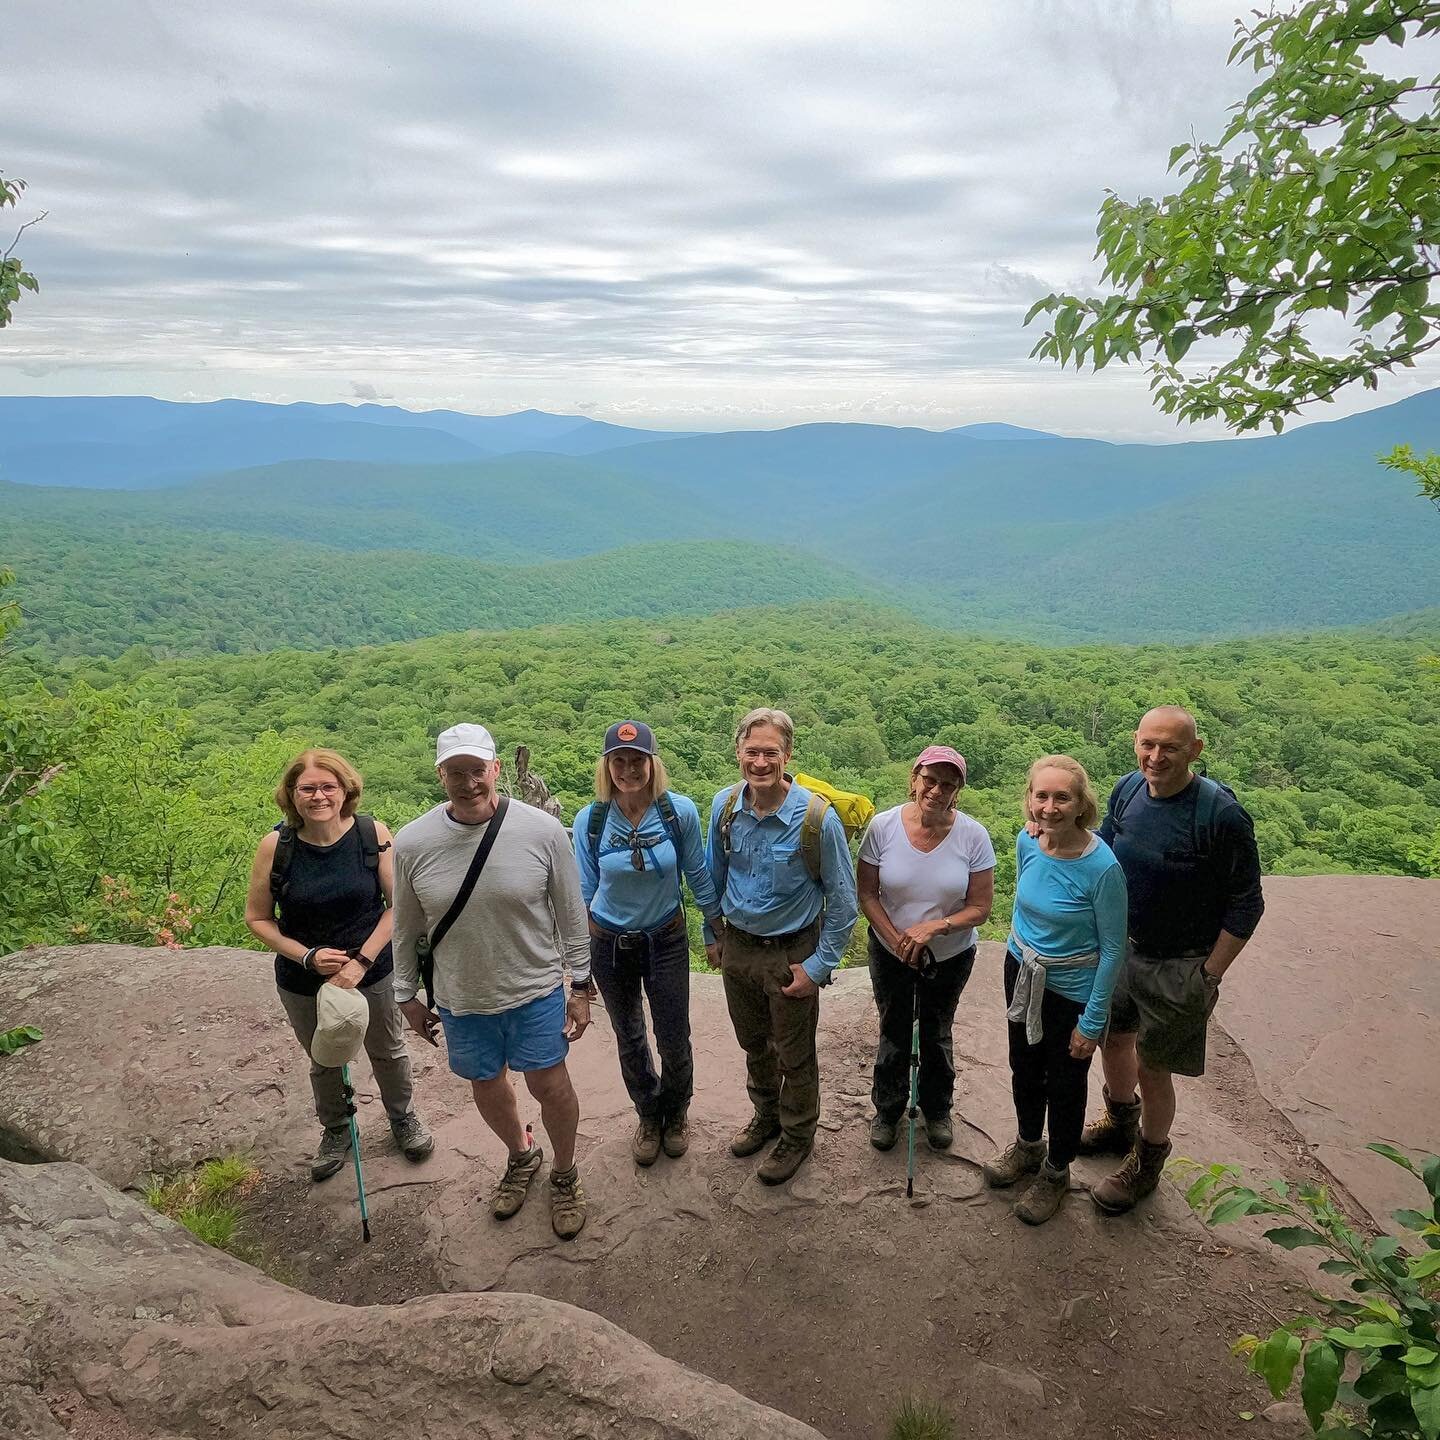 Great conversation, cooperative weather conditions, and a beautiful view. June&rsquo;s hiking social to Giant Ledge was a success! I&rsquo;m looking forward to the next hiking social in July. 

All hiking socials are announced through my newsletter. 